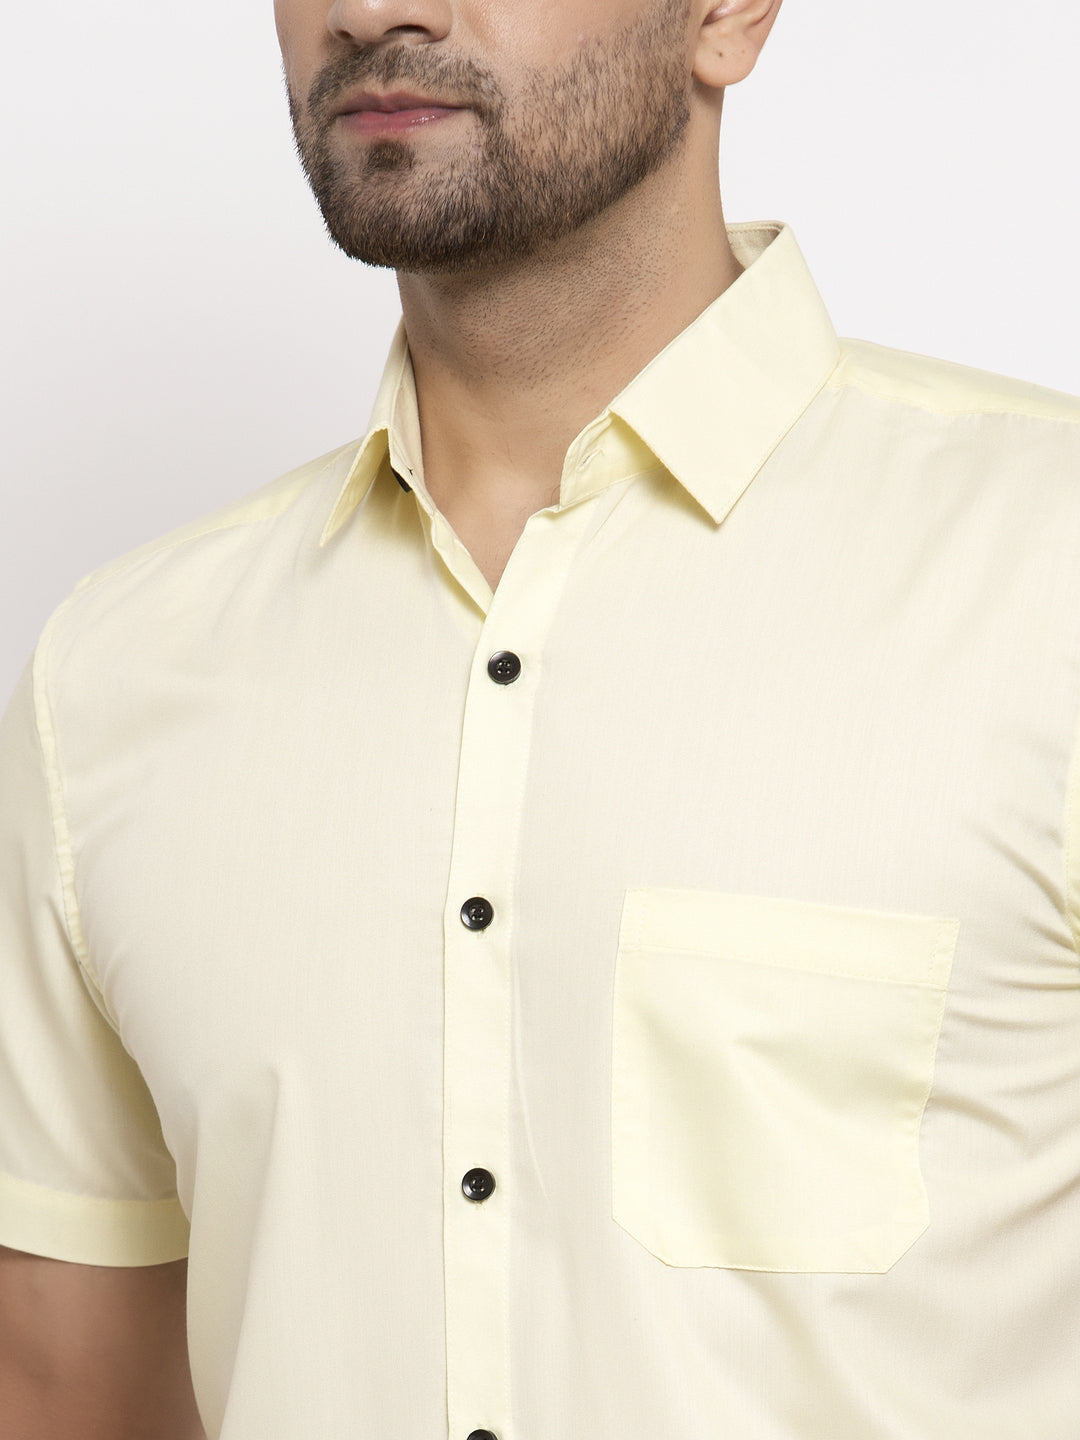 Men's Yellow Cotton Half Sleeves Solid Formal Shirts ( SF 754Lime ) - Jainish